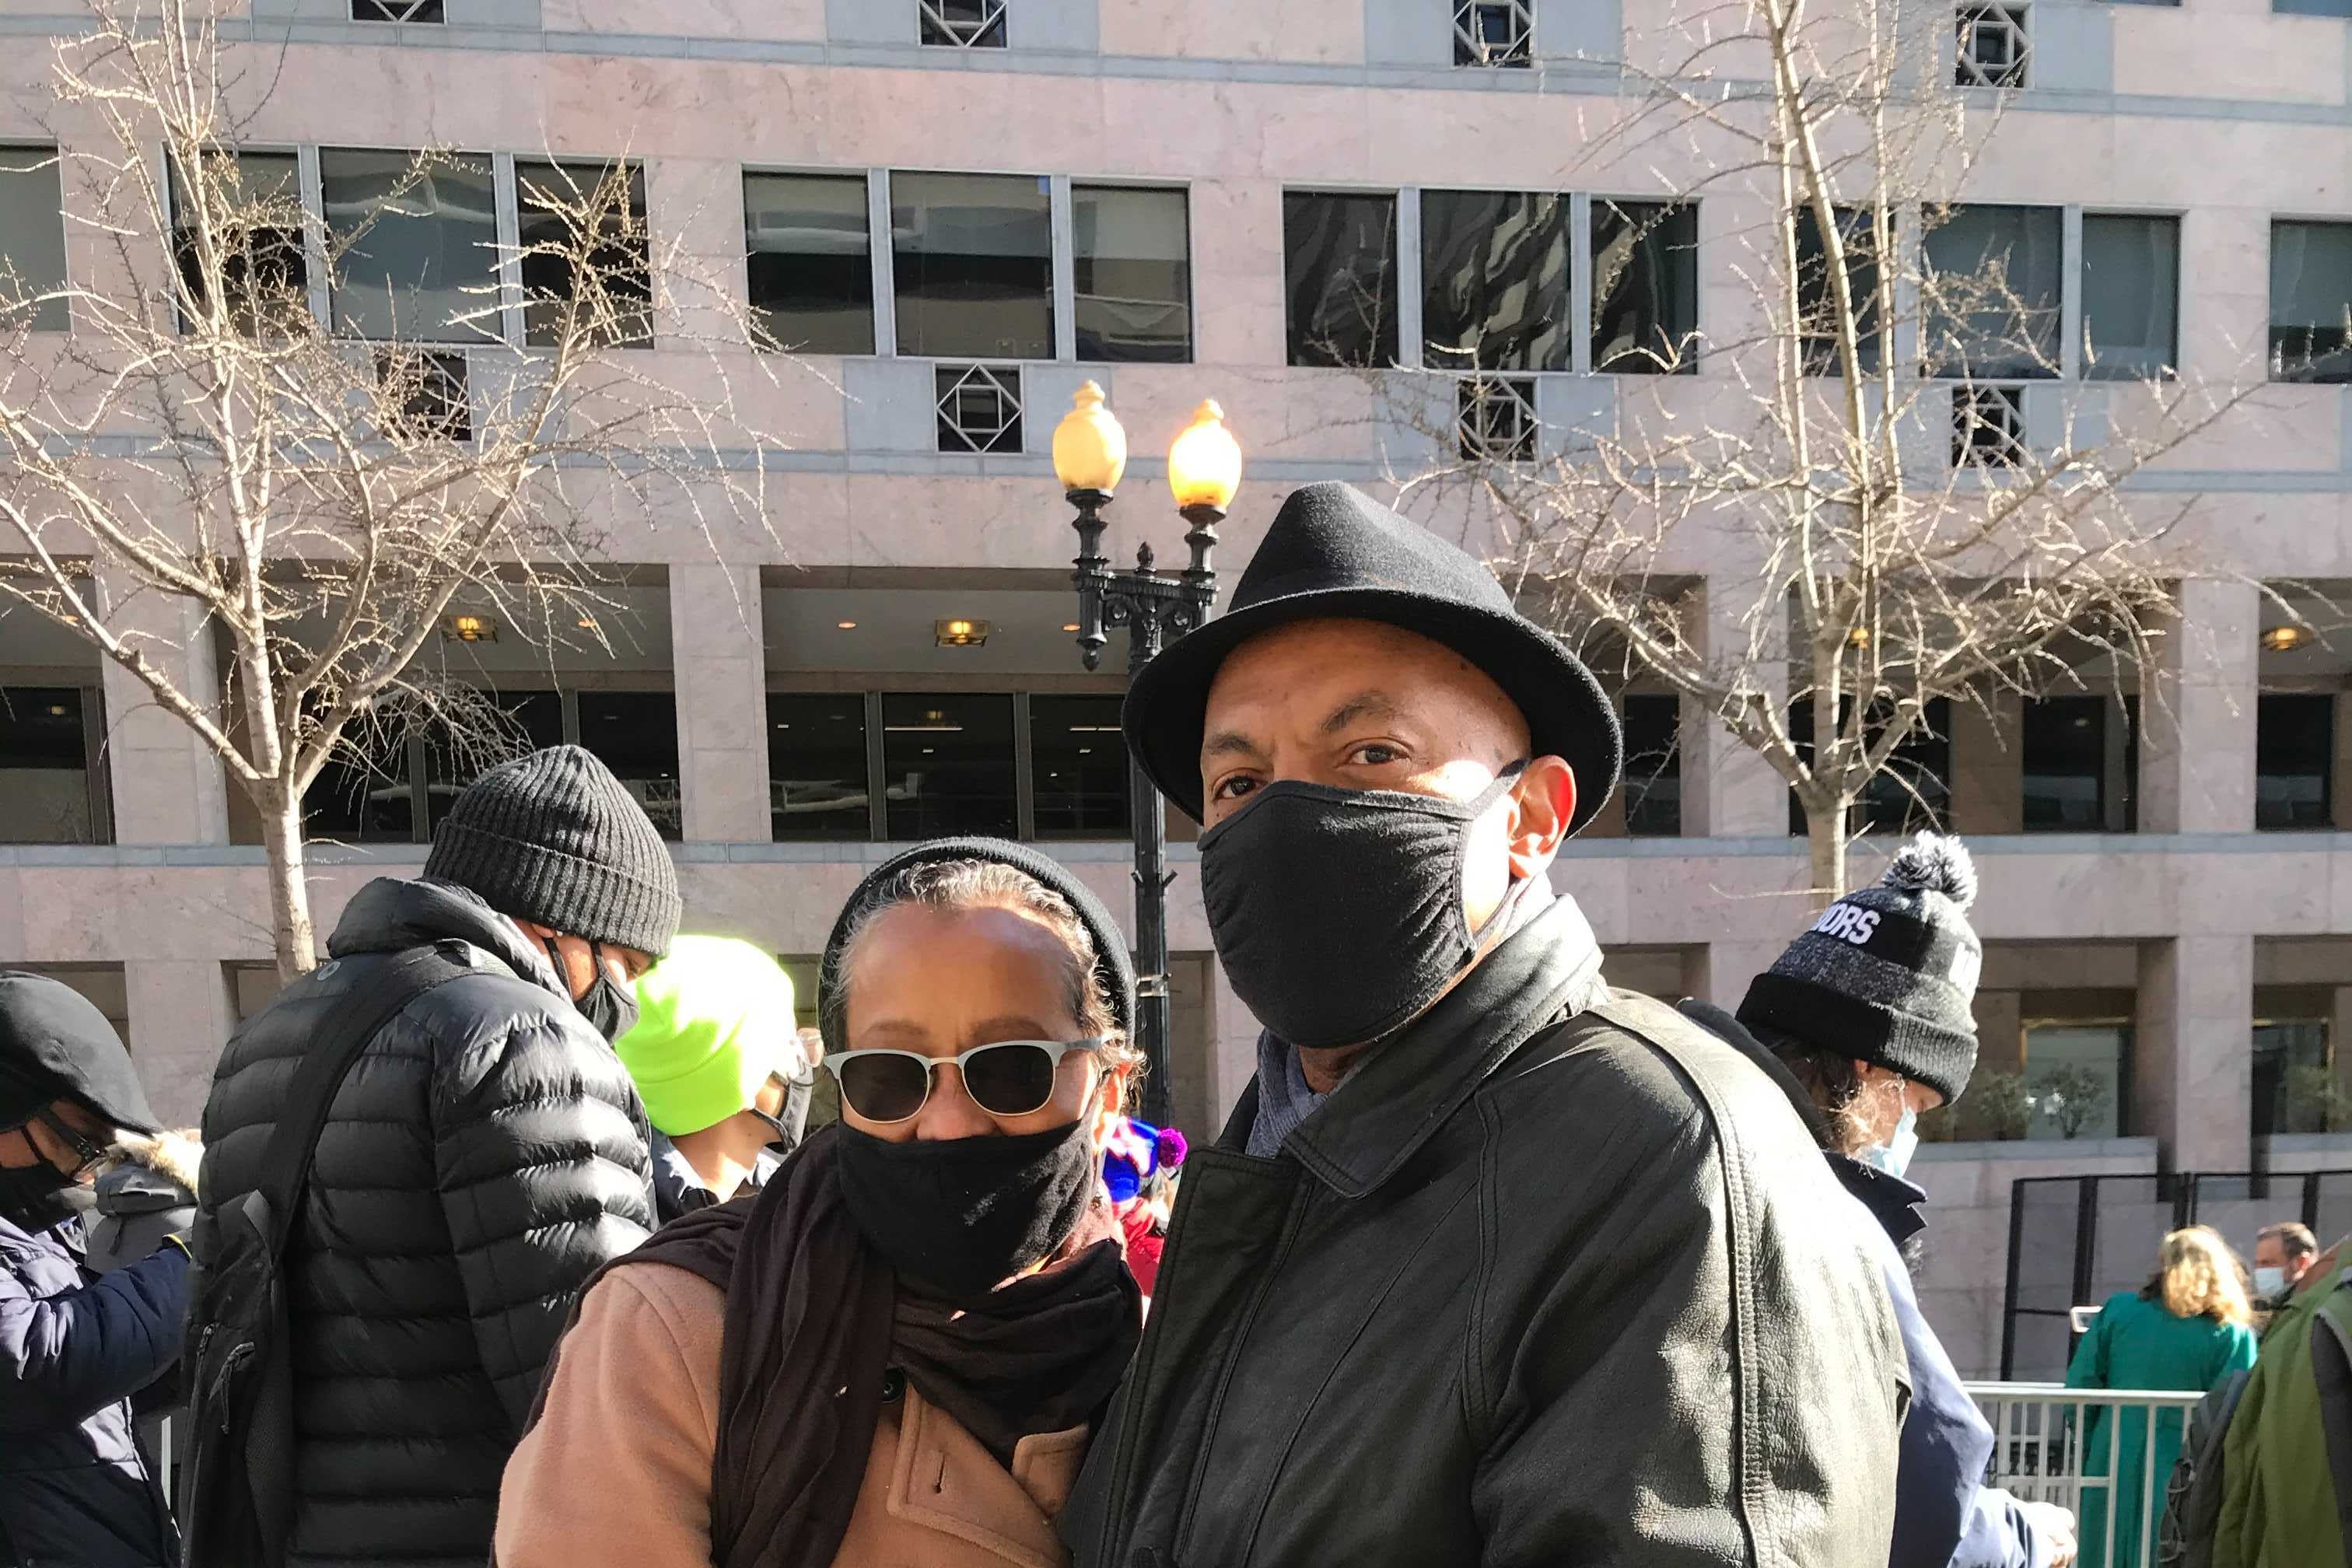 Two people wearing black masks stand in front of a metal barrier